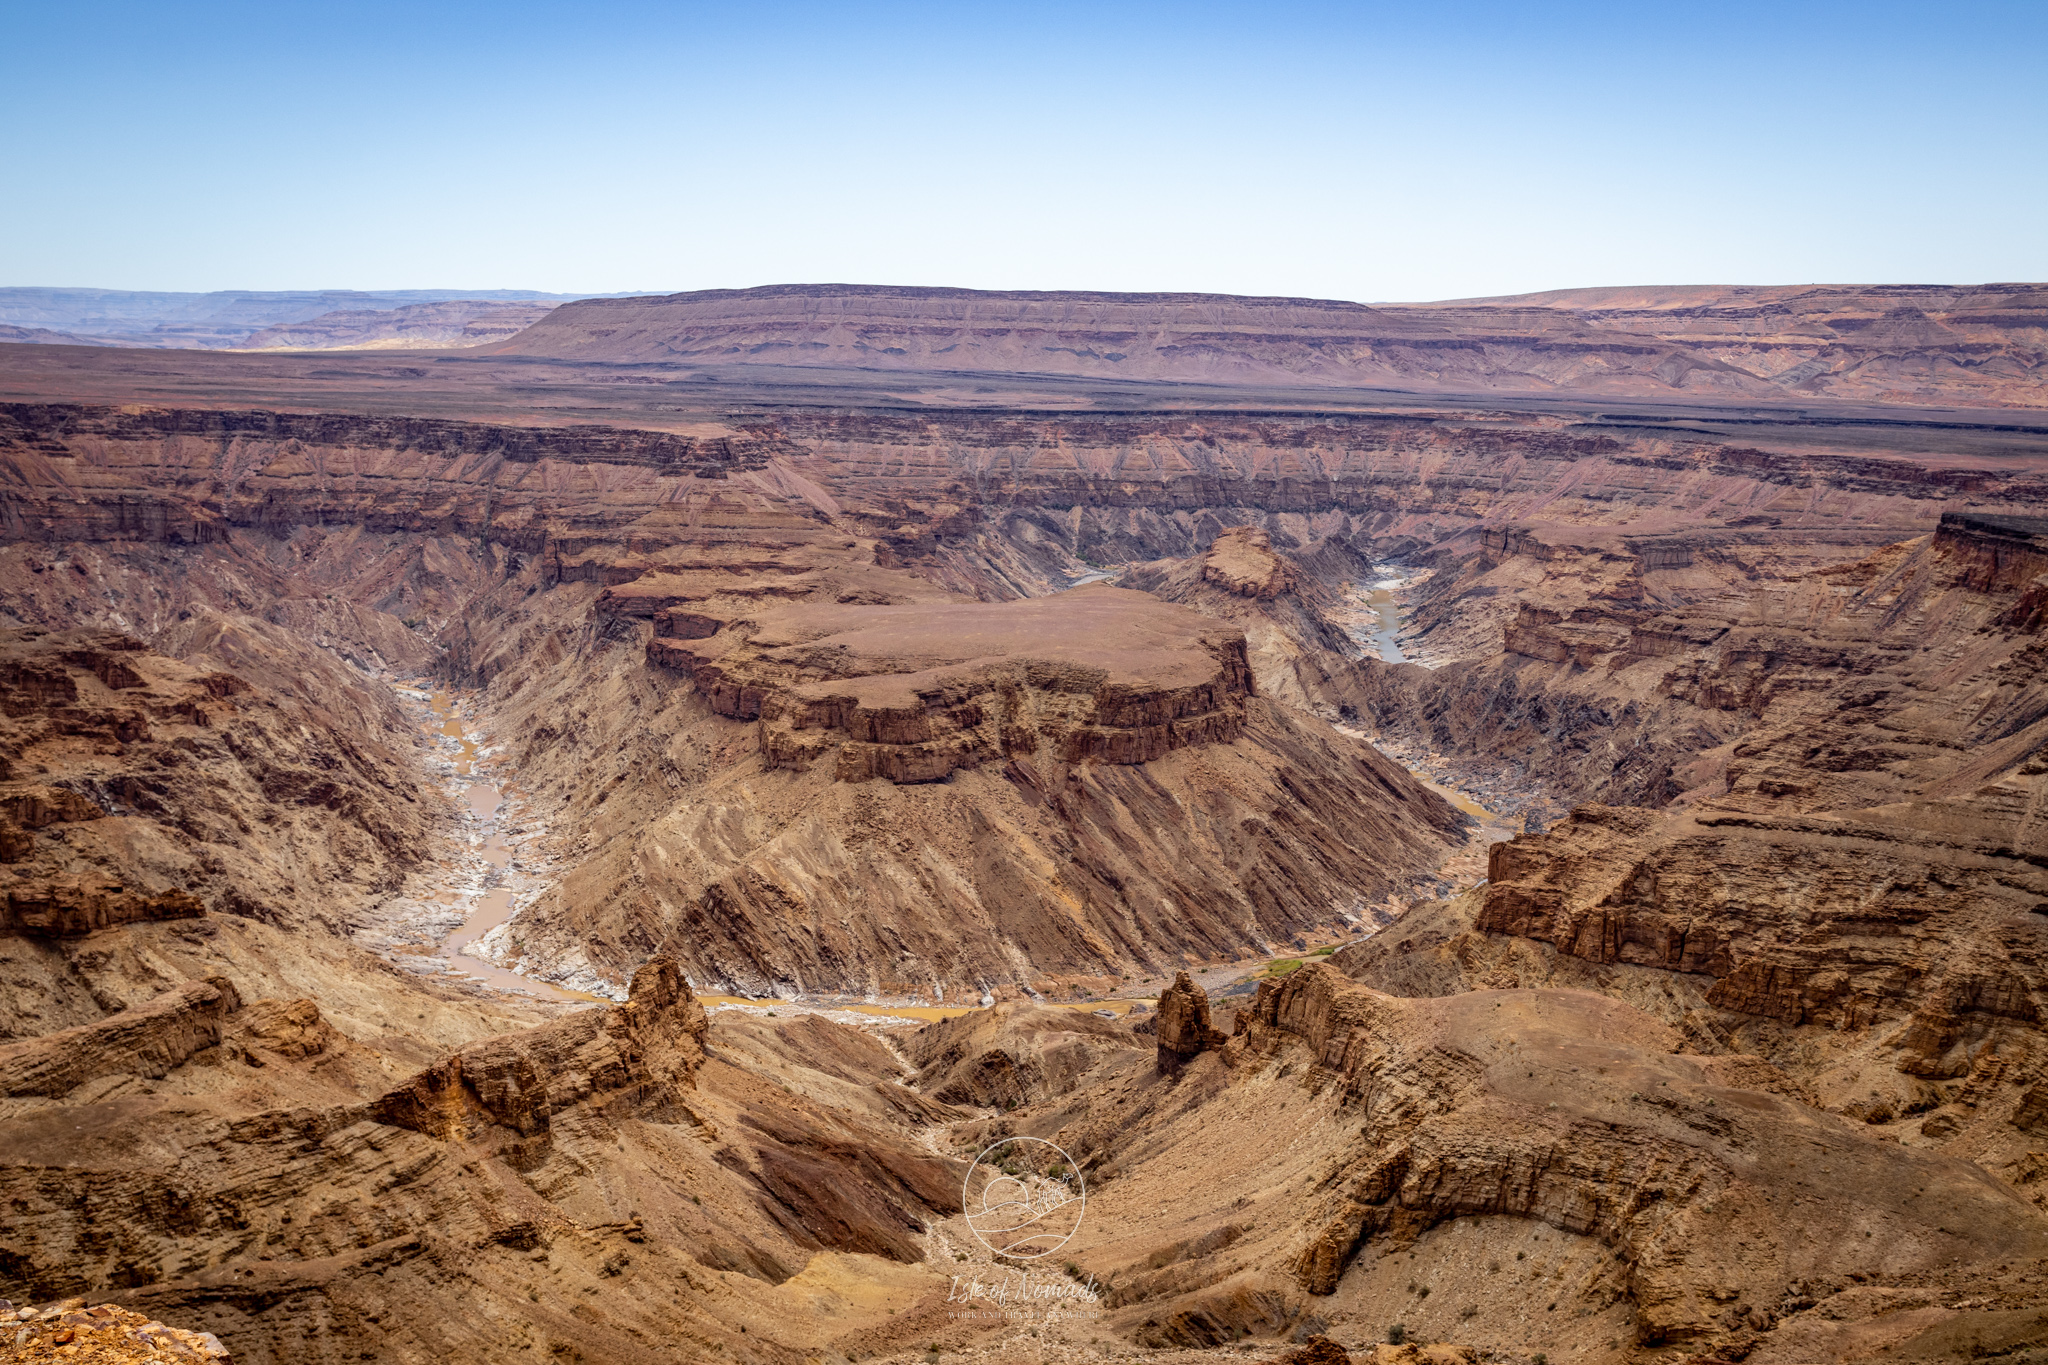 The Fish River Canyon is a sight to behold